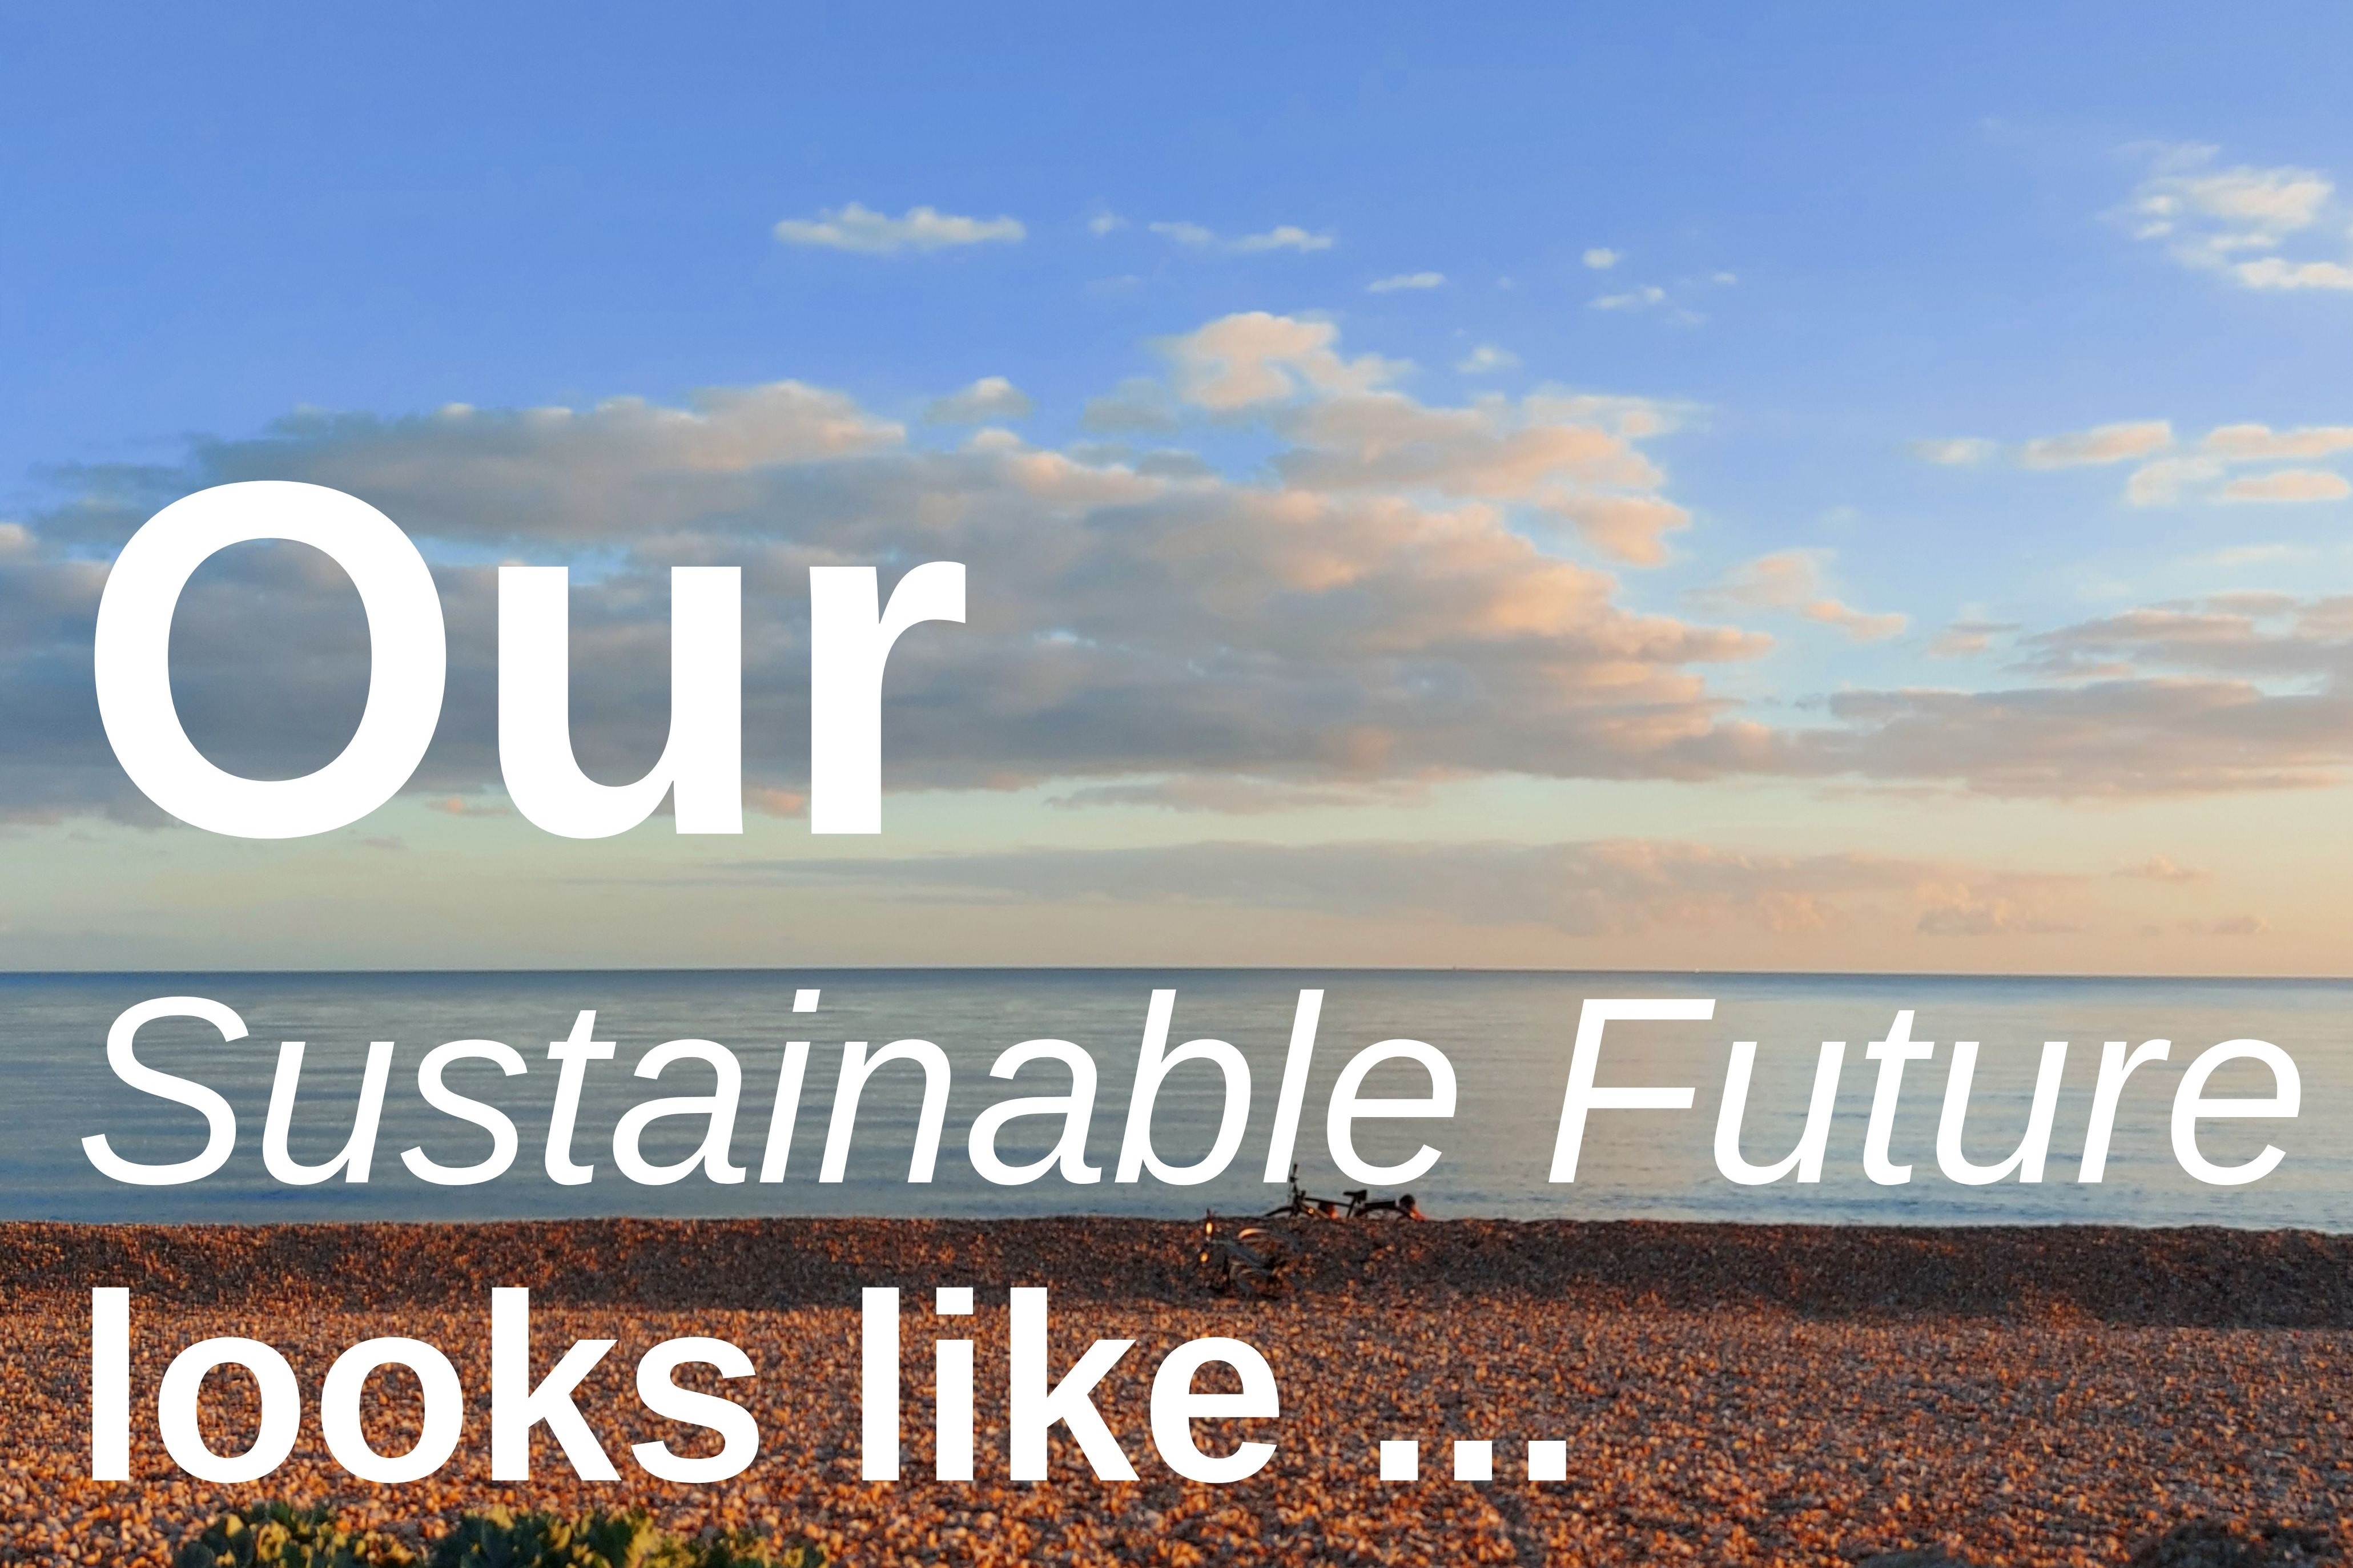 An image v=The Folkestone &amp; Hythe Sustainable Futures Forum poster